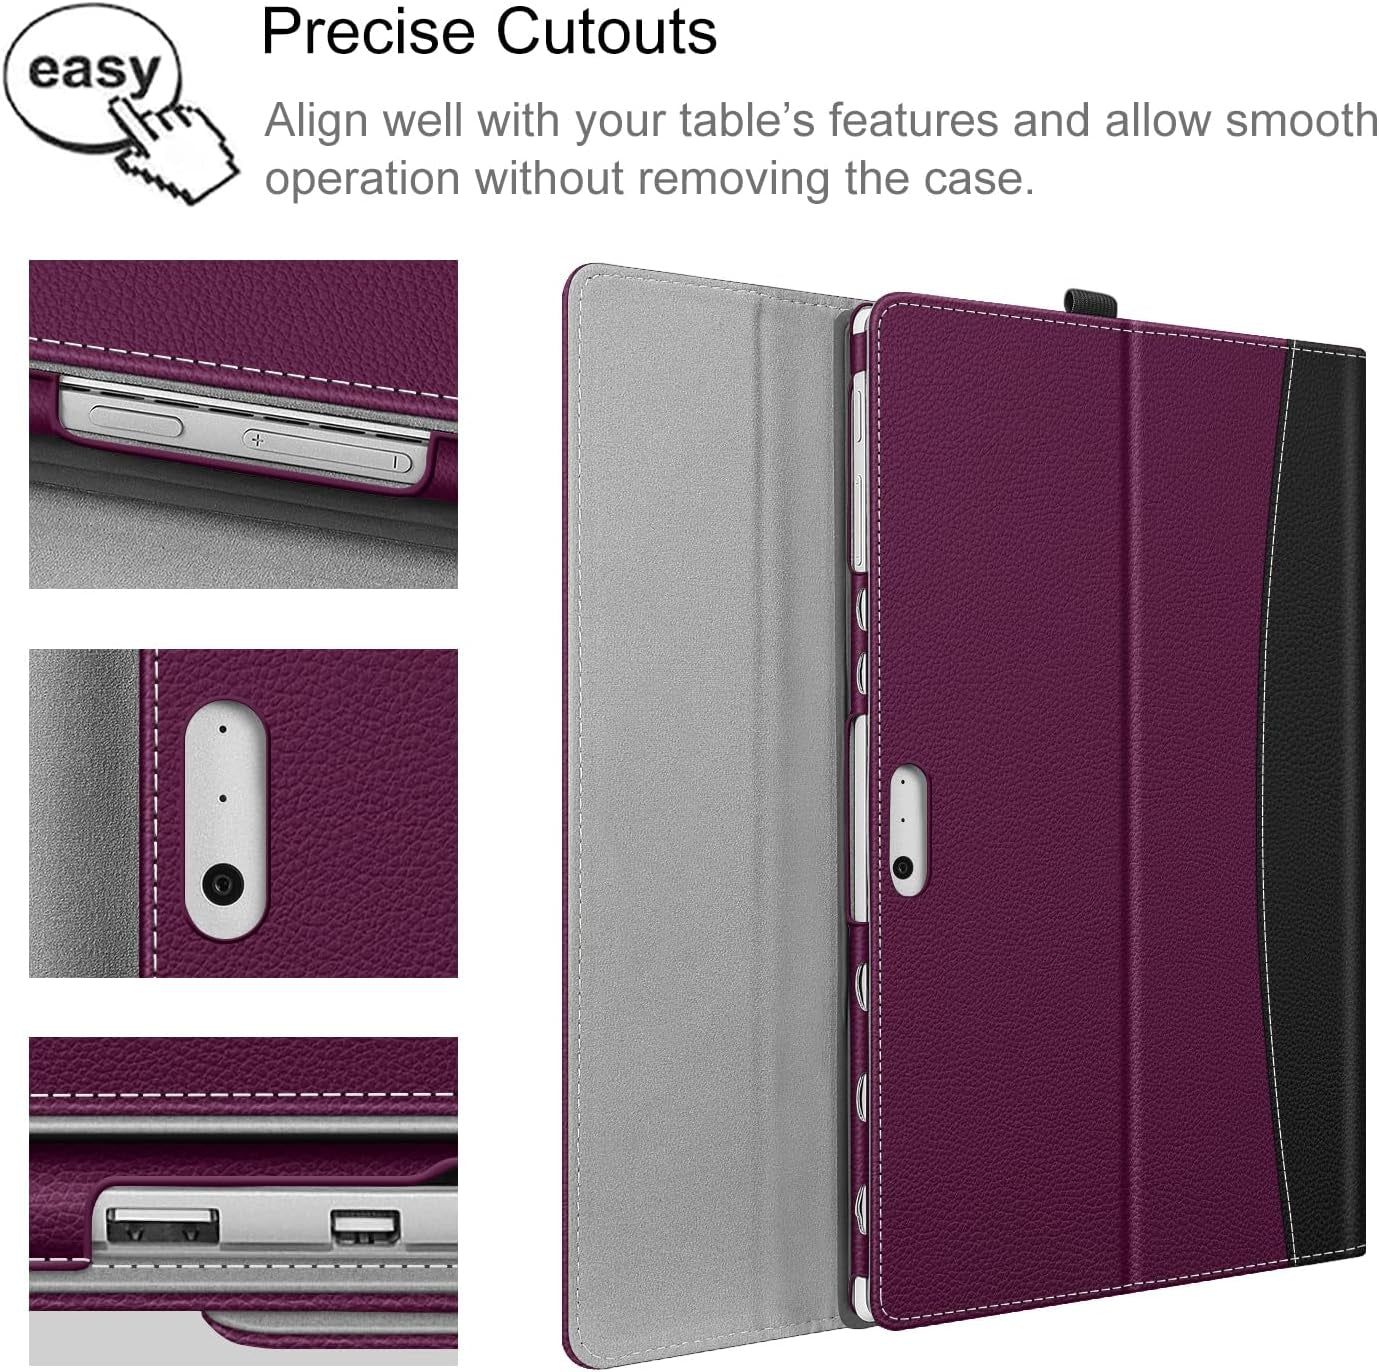 Case for 12.3 Inch Microsoft Surface Pro 7 Plus, Surface Pro 7, Surface Pro 6, Pro 5, Pro 4, Pro 3 - Portfolio Business Cover with Pocket, Compatible with Type Cover Keyboard, Purple